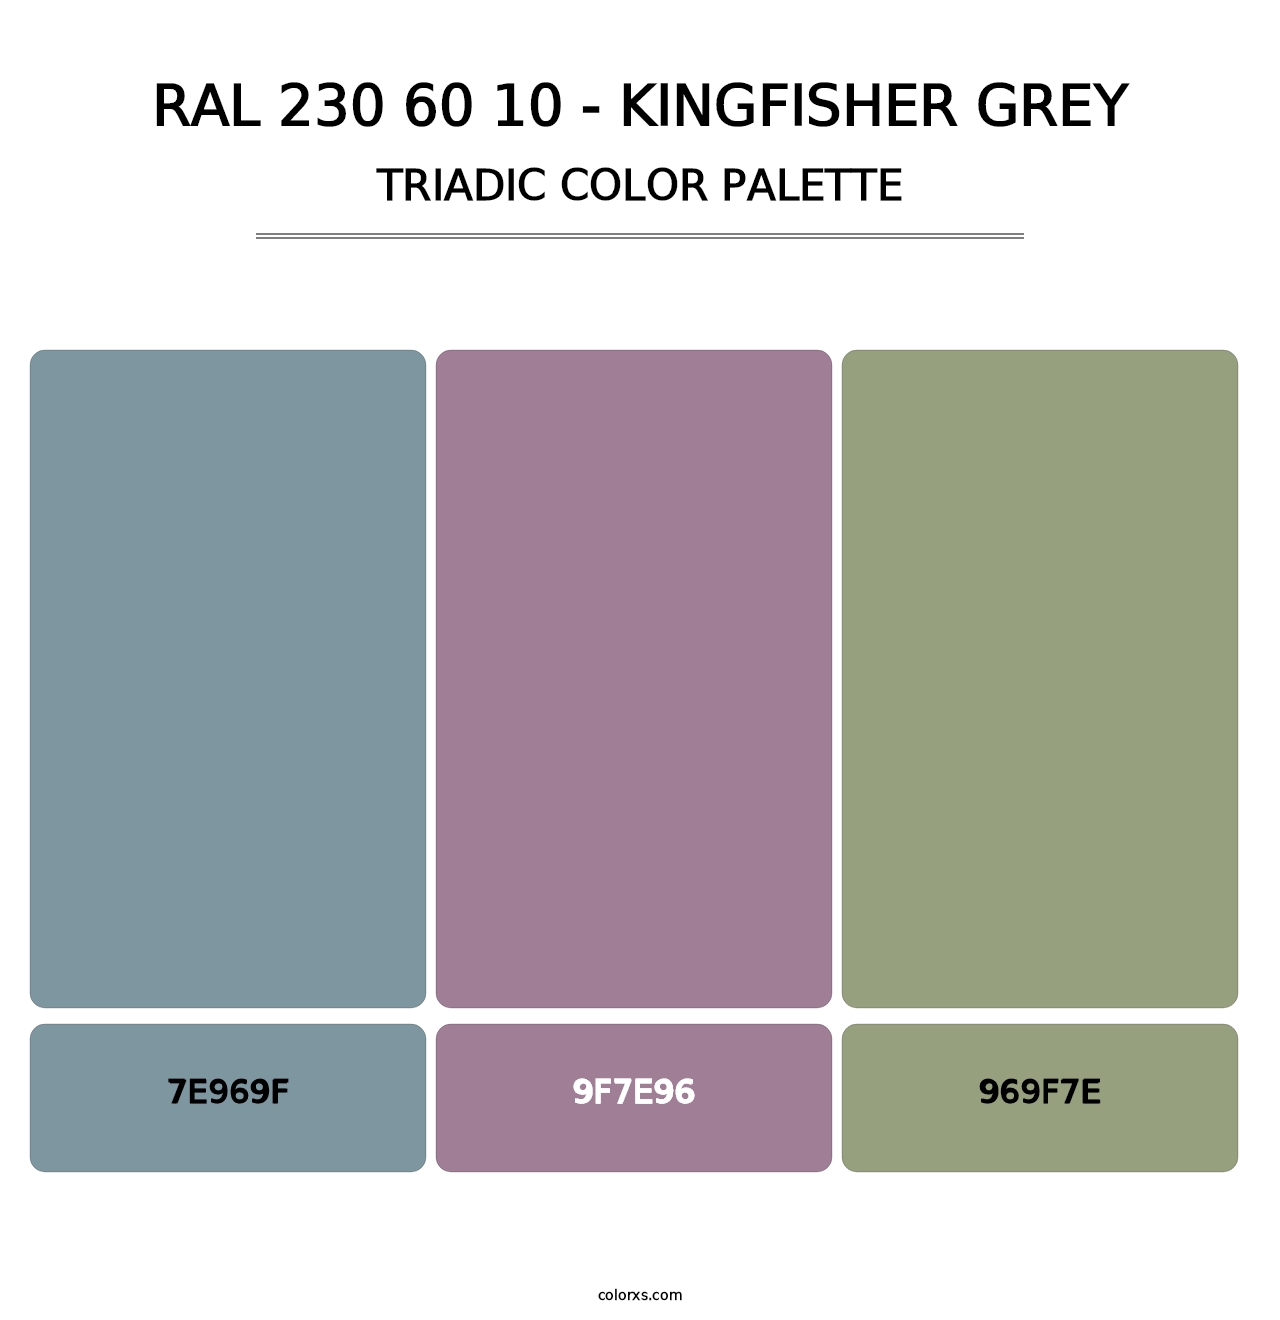 RAL 230 60 10 - Kingfisher Grey - Triadic Color Palette